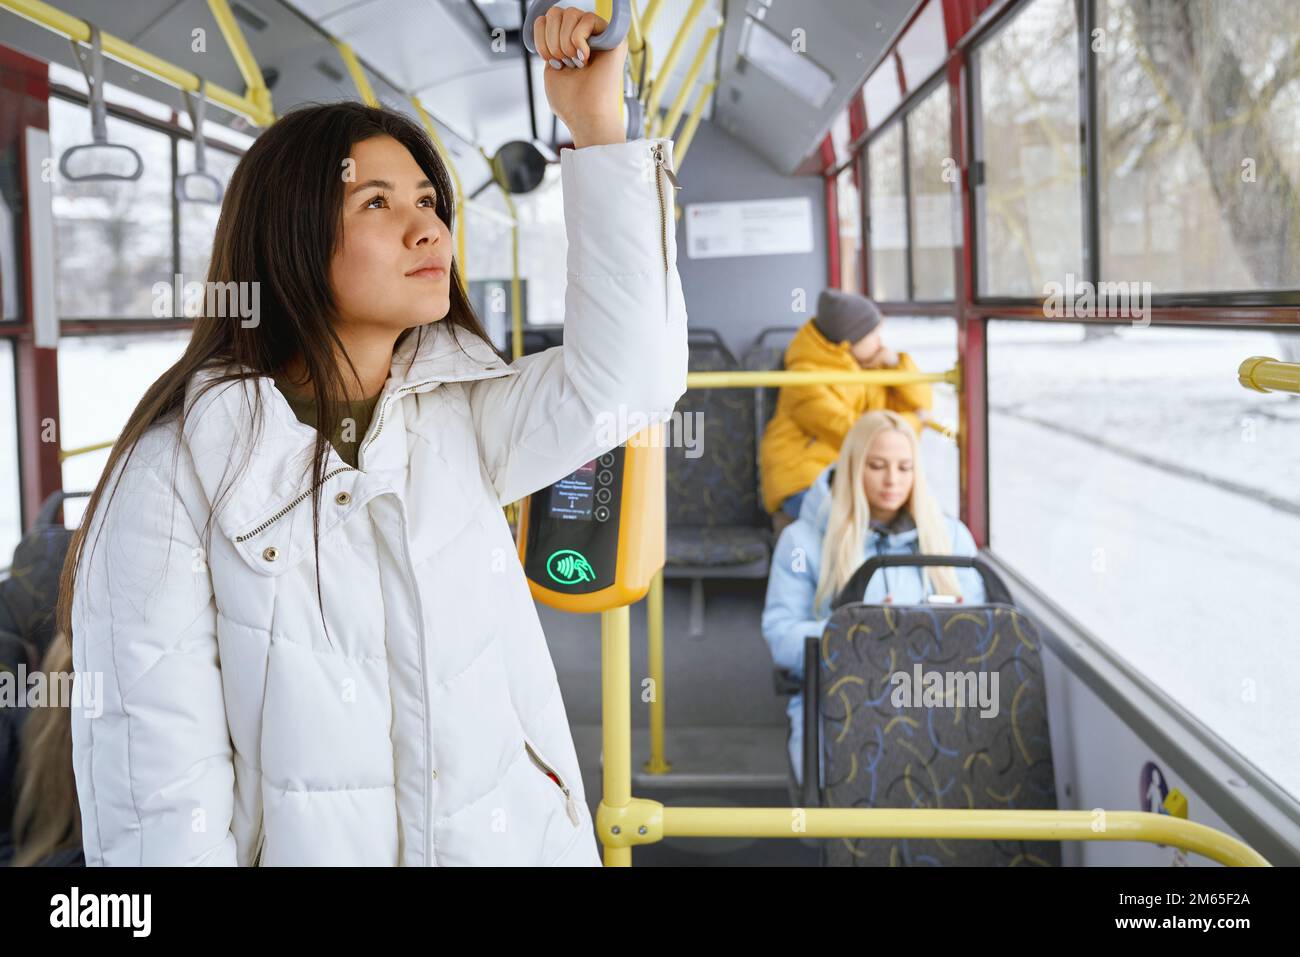 Portrait of cute nice female with long dark hair wearing white coat dreaming and thinking about future plans. Other passengers sitting staring at phon Stock Photo